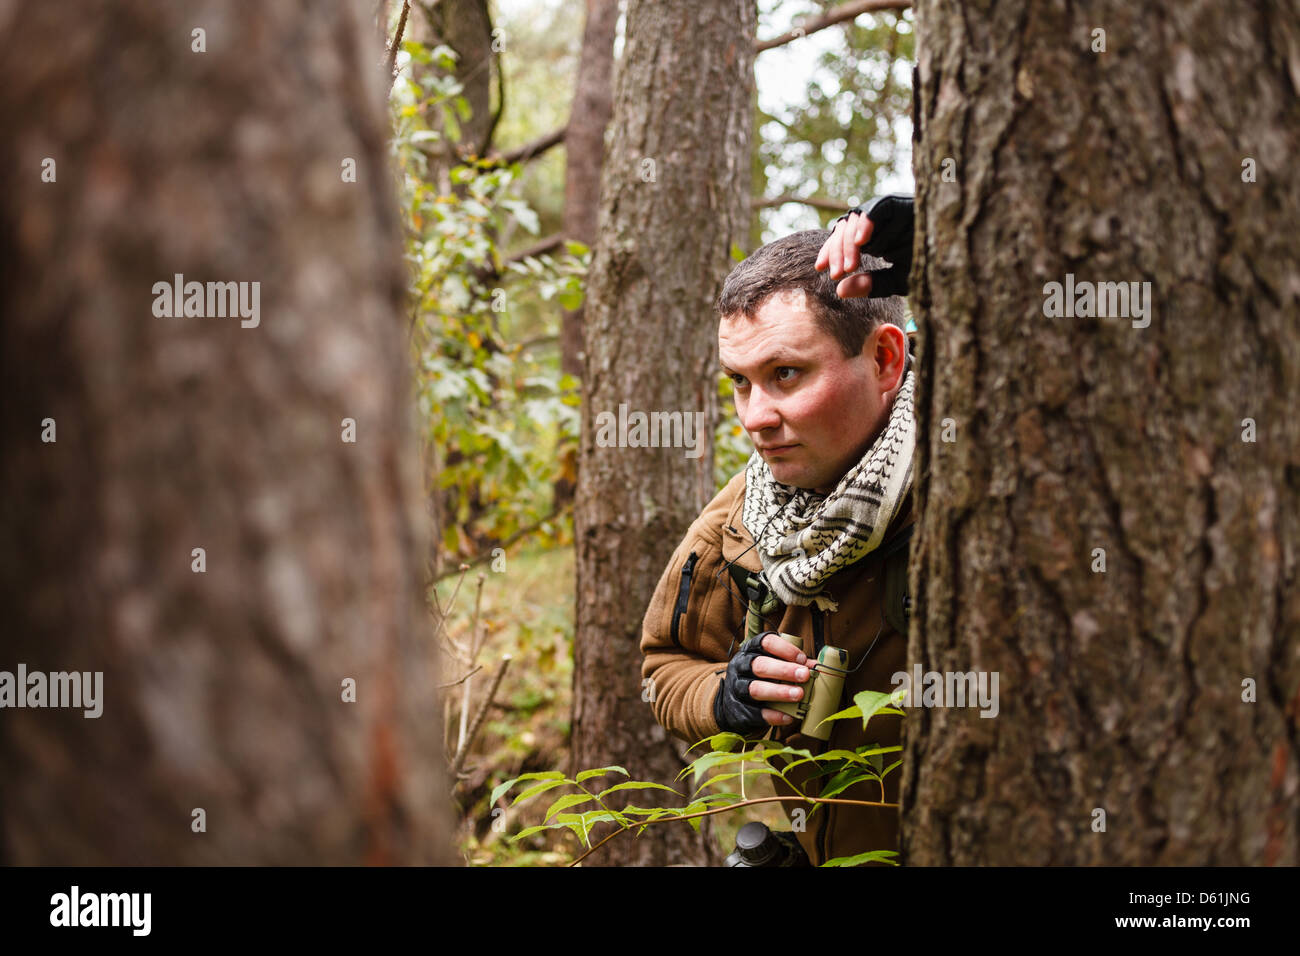 Man with binoculars at a forest. Stock Photo